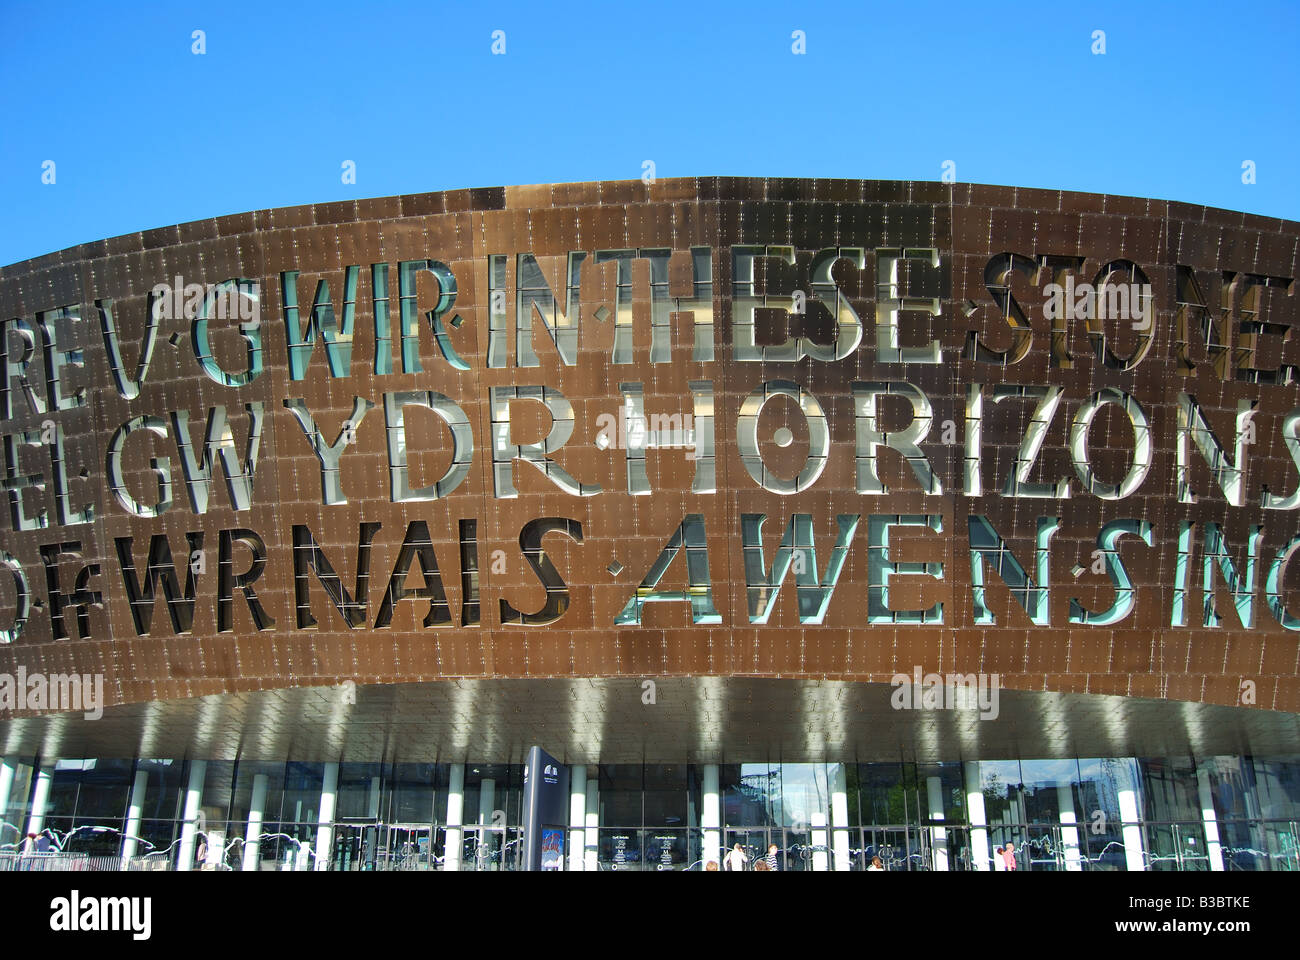 Wales Millennium Centre, Cardiff, Cardiff Bay, South Glamorgan, Wales, Royaume-Uni Banque D'Images